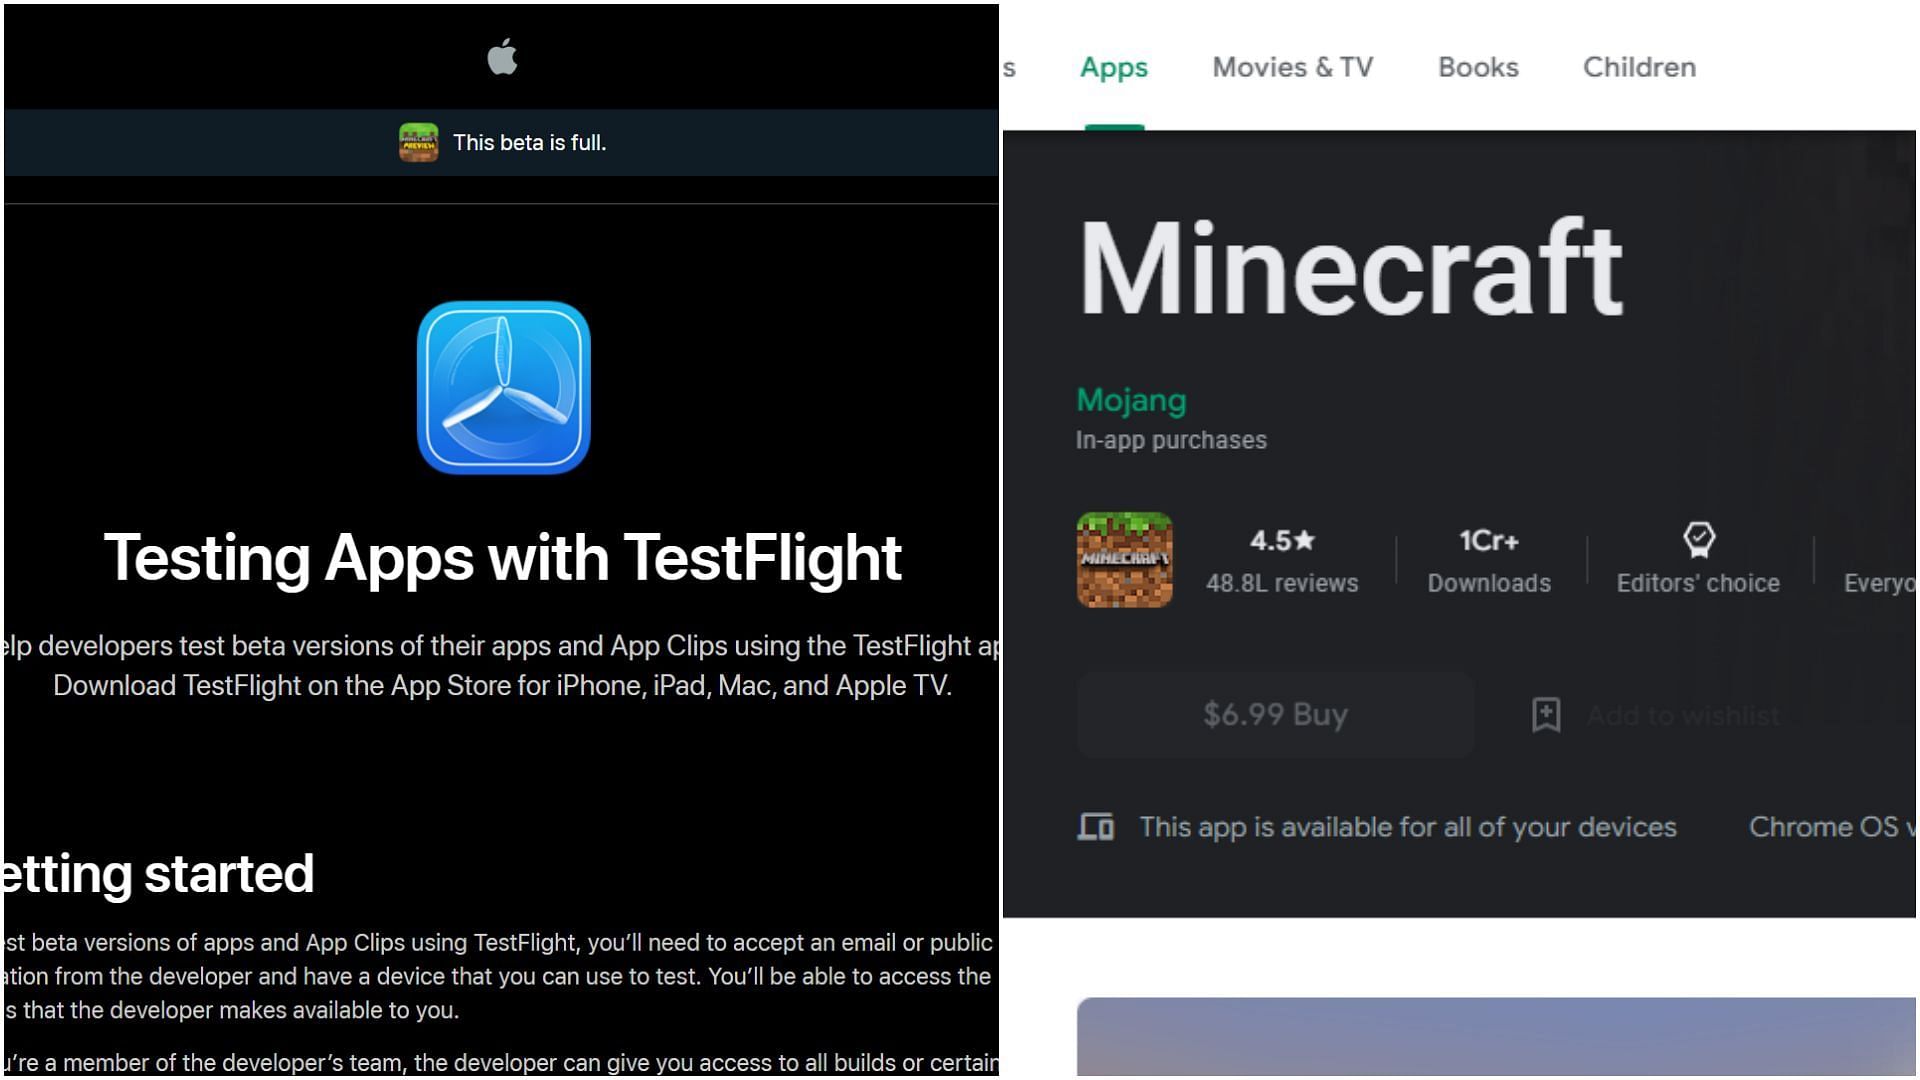 Minecraft Bedrock beta preview 1.20.0.23 can be accessed through the Google Play Store and TestFlight on Android and iOS (Image via Sportskeeda)